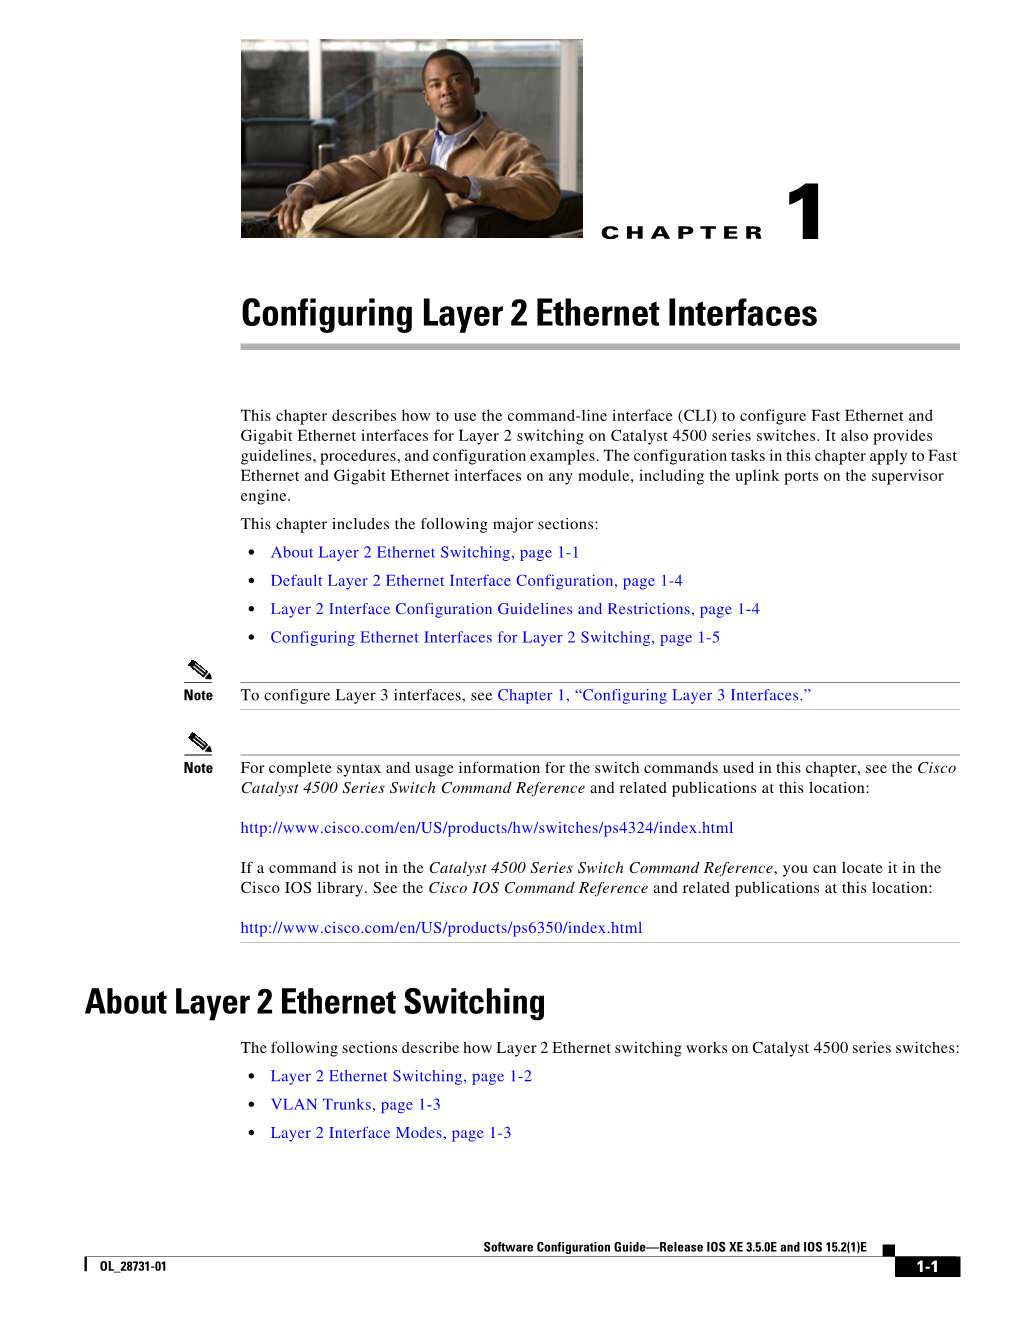 Configuring Layer 2 Ethernet Interfaces